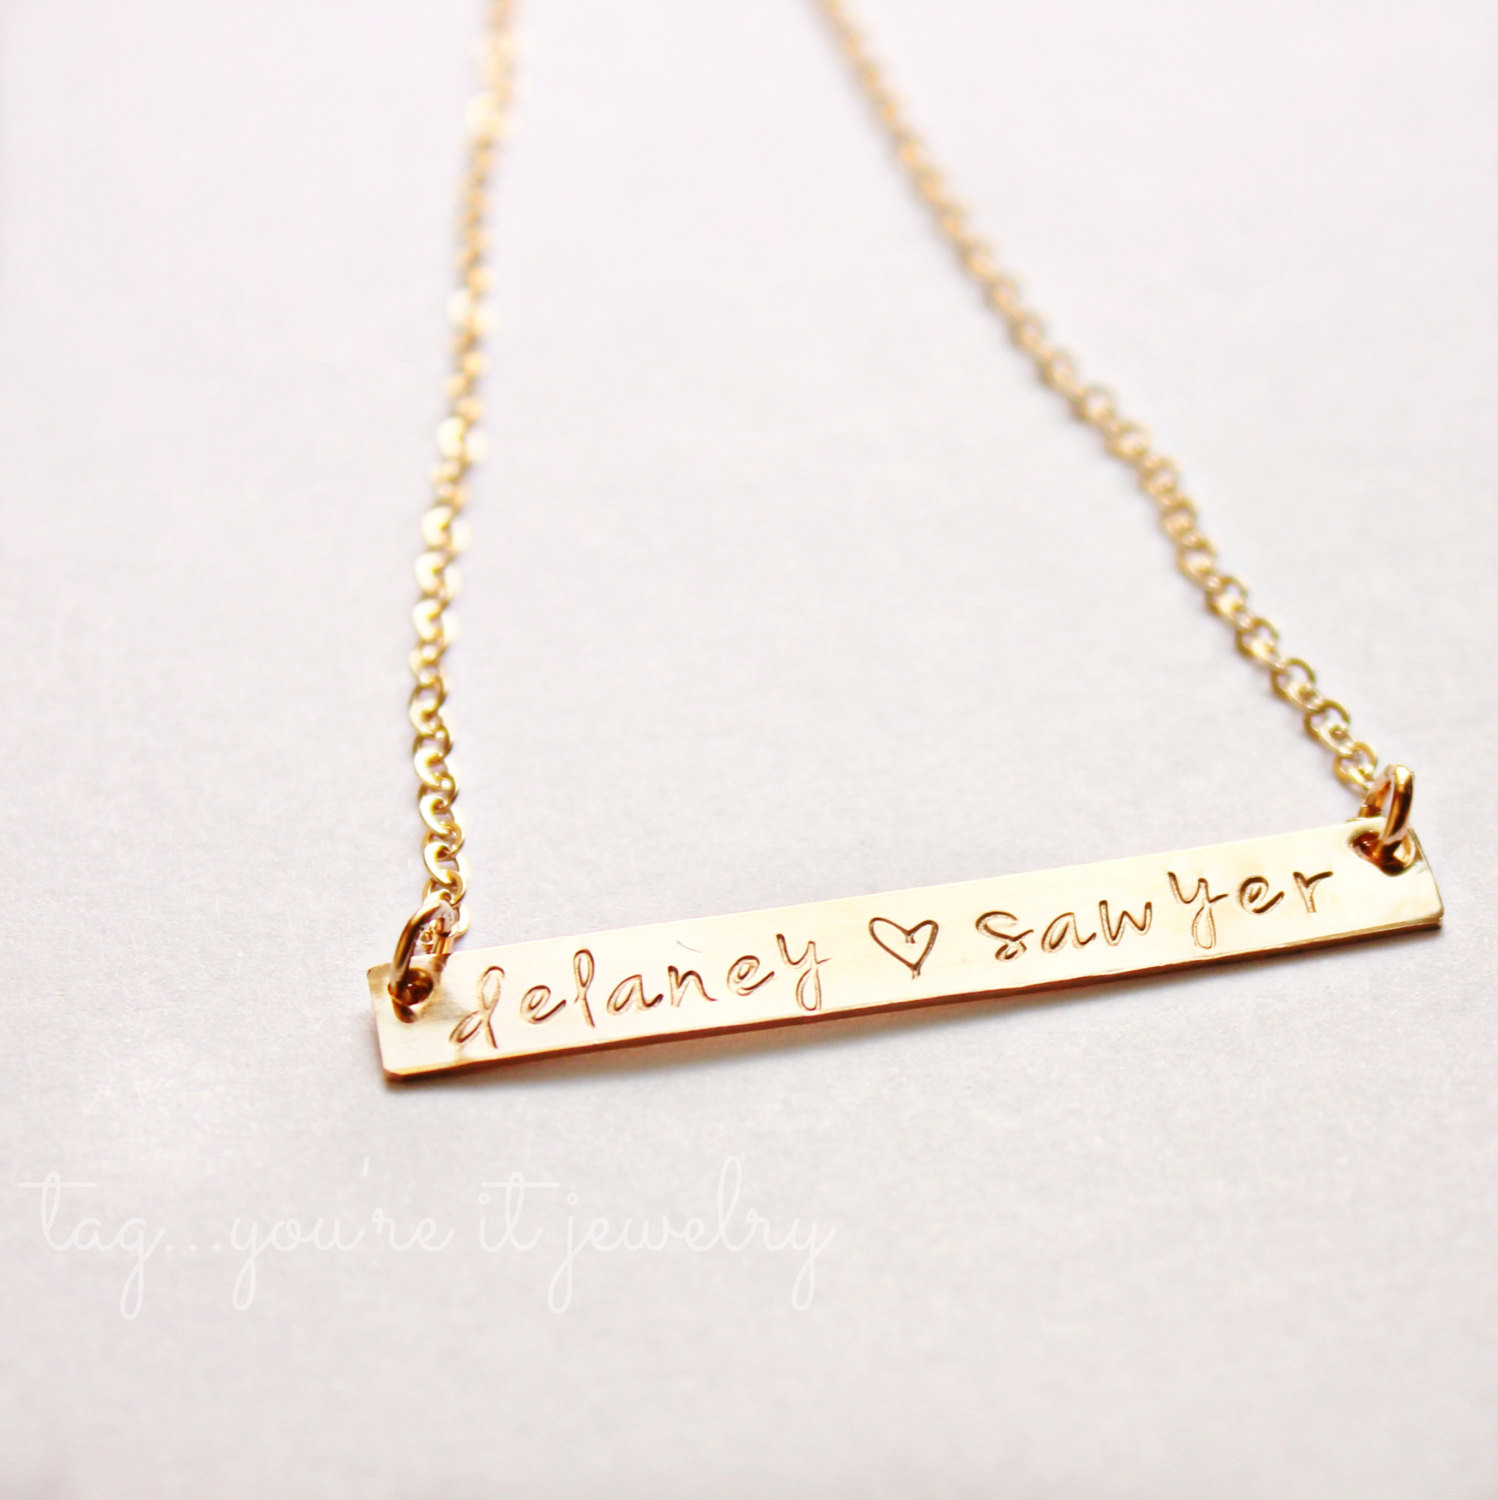 Gold Bar Nameplate Necklace
 Gold Bar Necklace Personalized Name Plate by TagYoureItJewelry